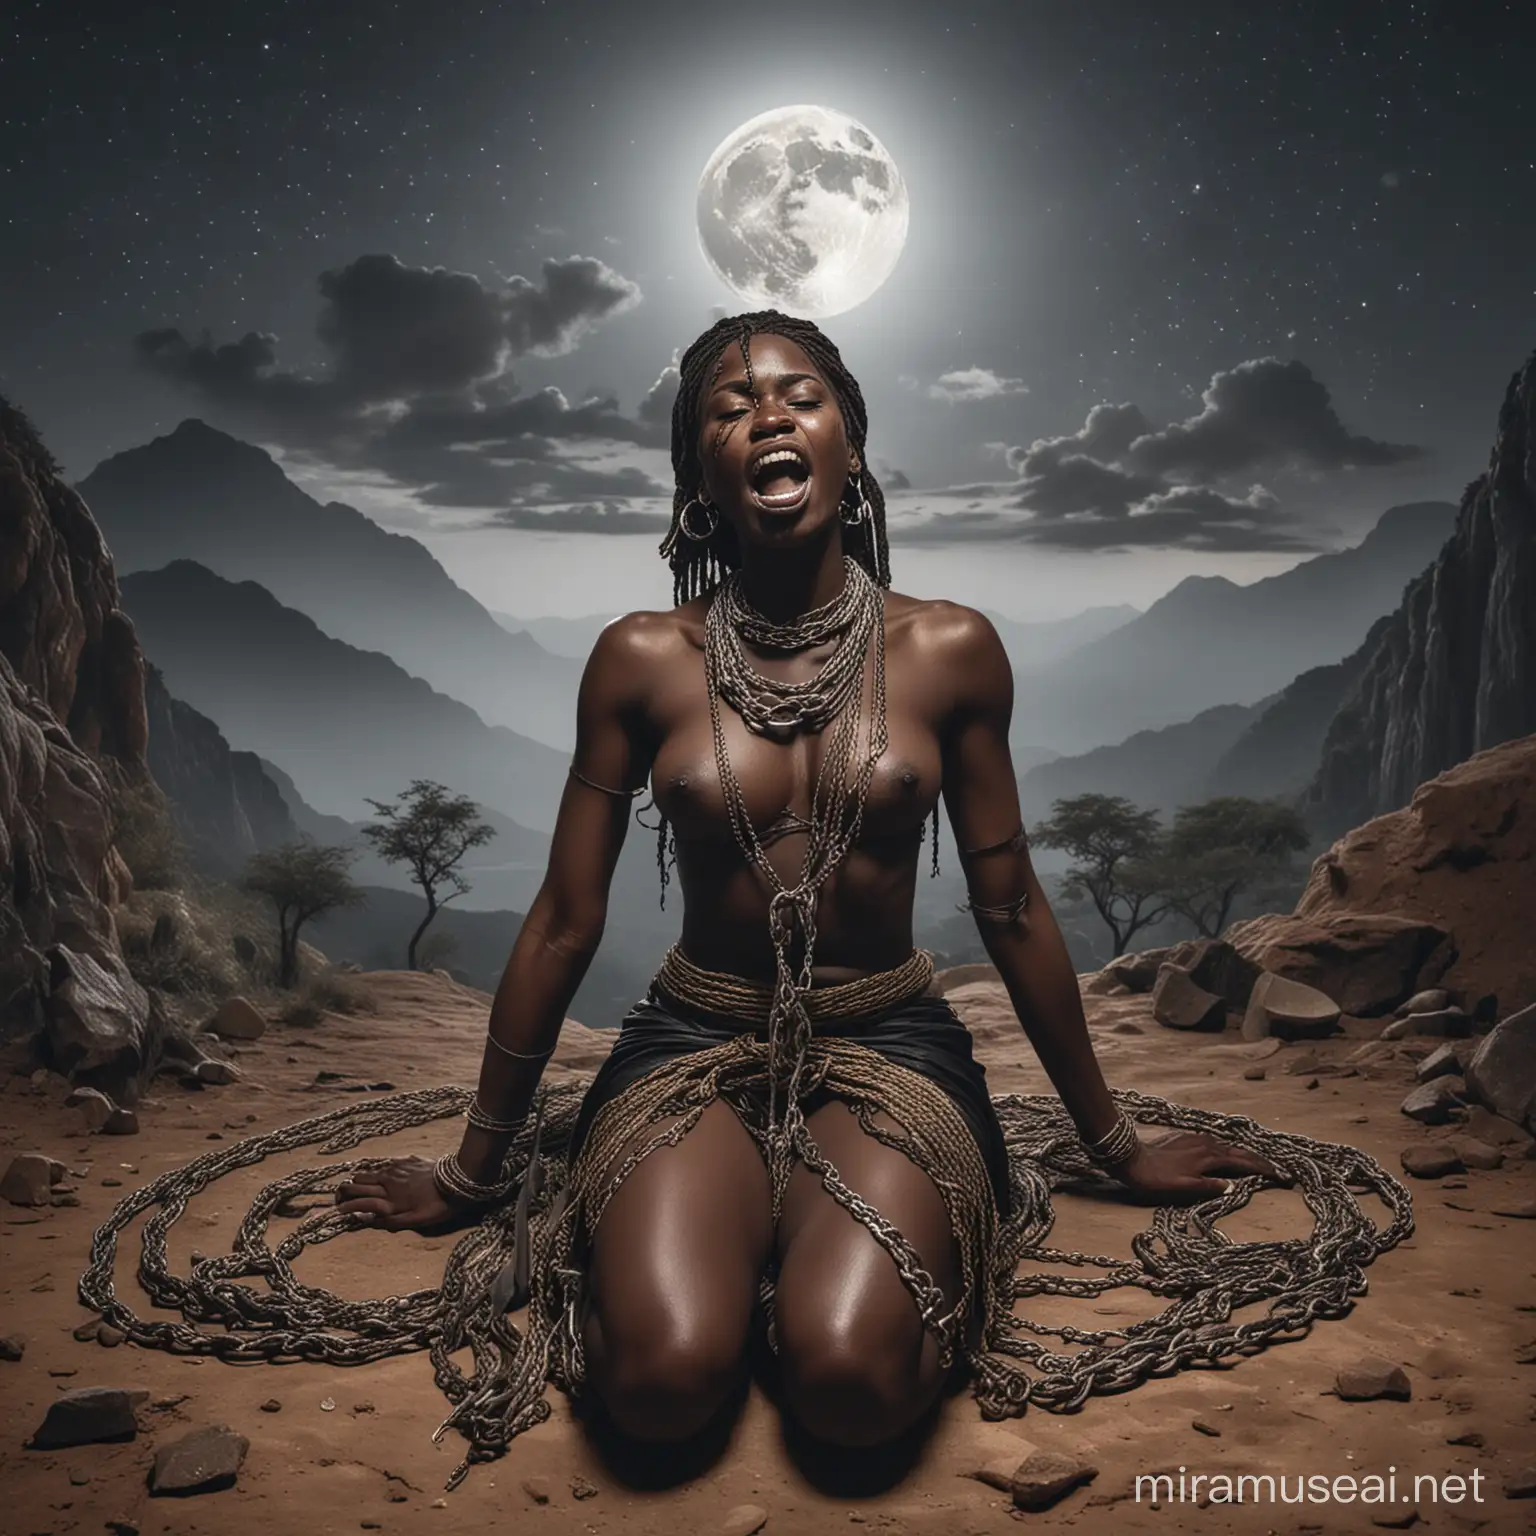 A conquered black African salve woman, wrapper with big chains, mouth tied with rope, crying, other slaves tied , seating down on the ground, mountainous area, night time with moon light